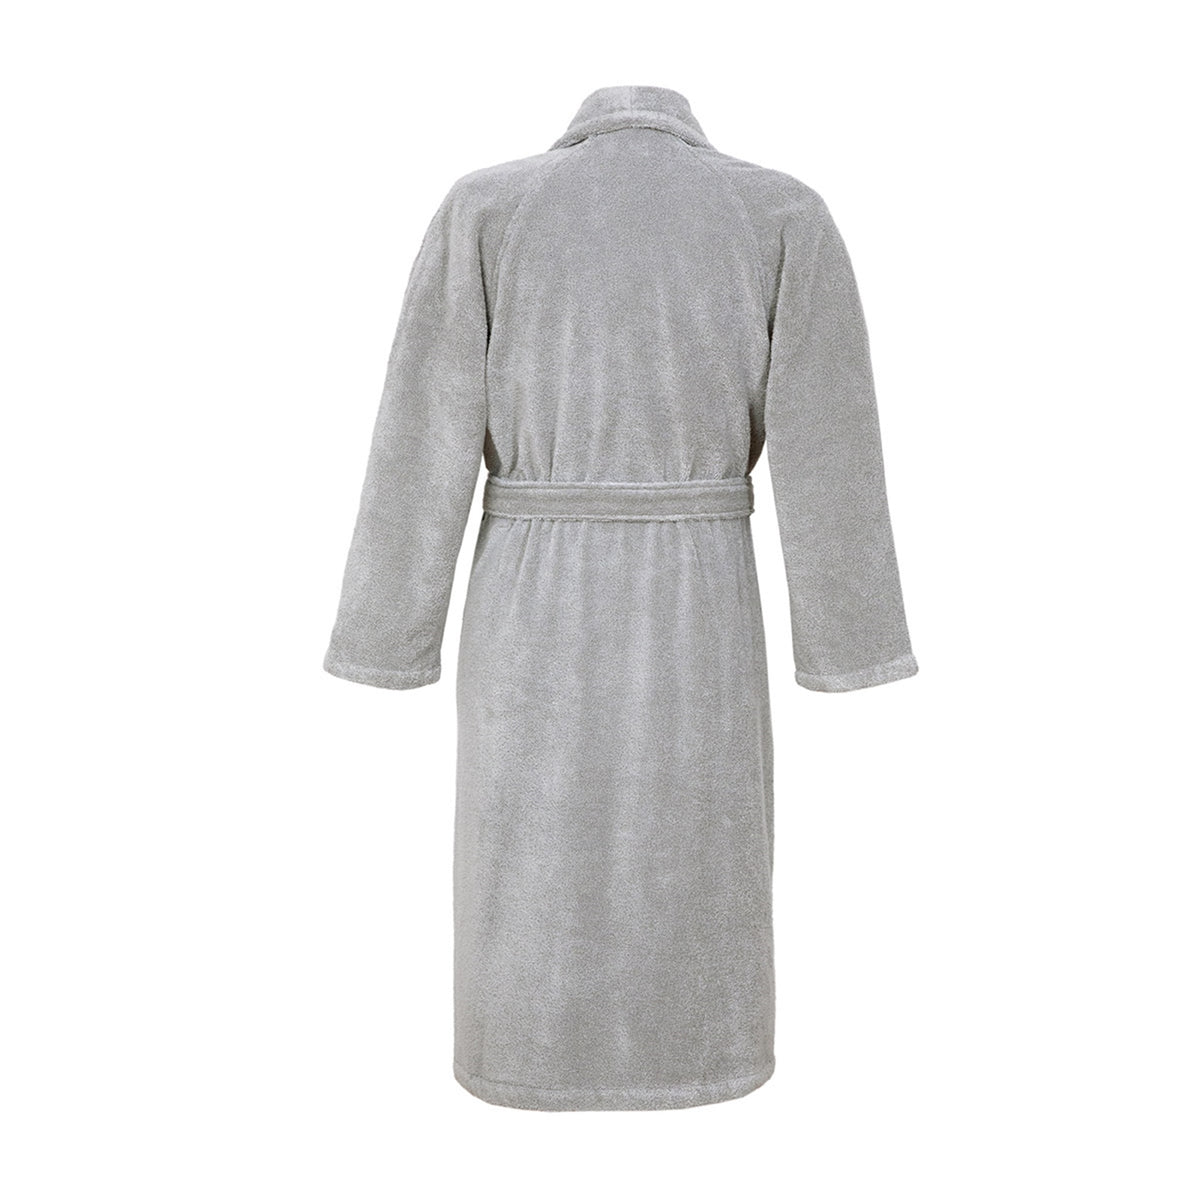 Back View of Yves Delorme Etoile Bath Robe in Color Platine